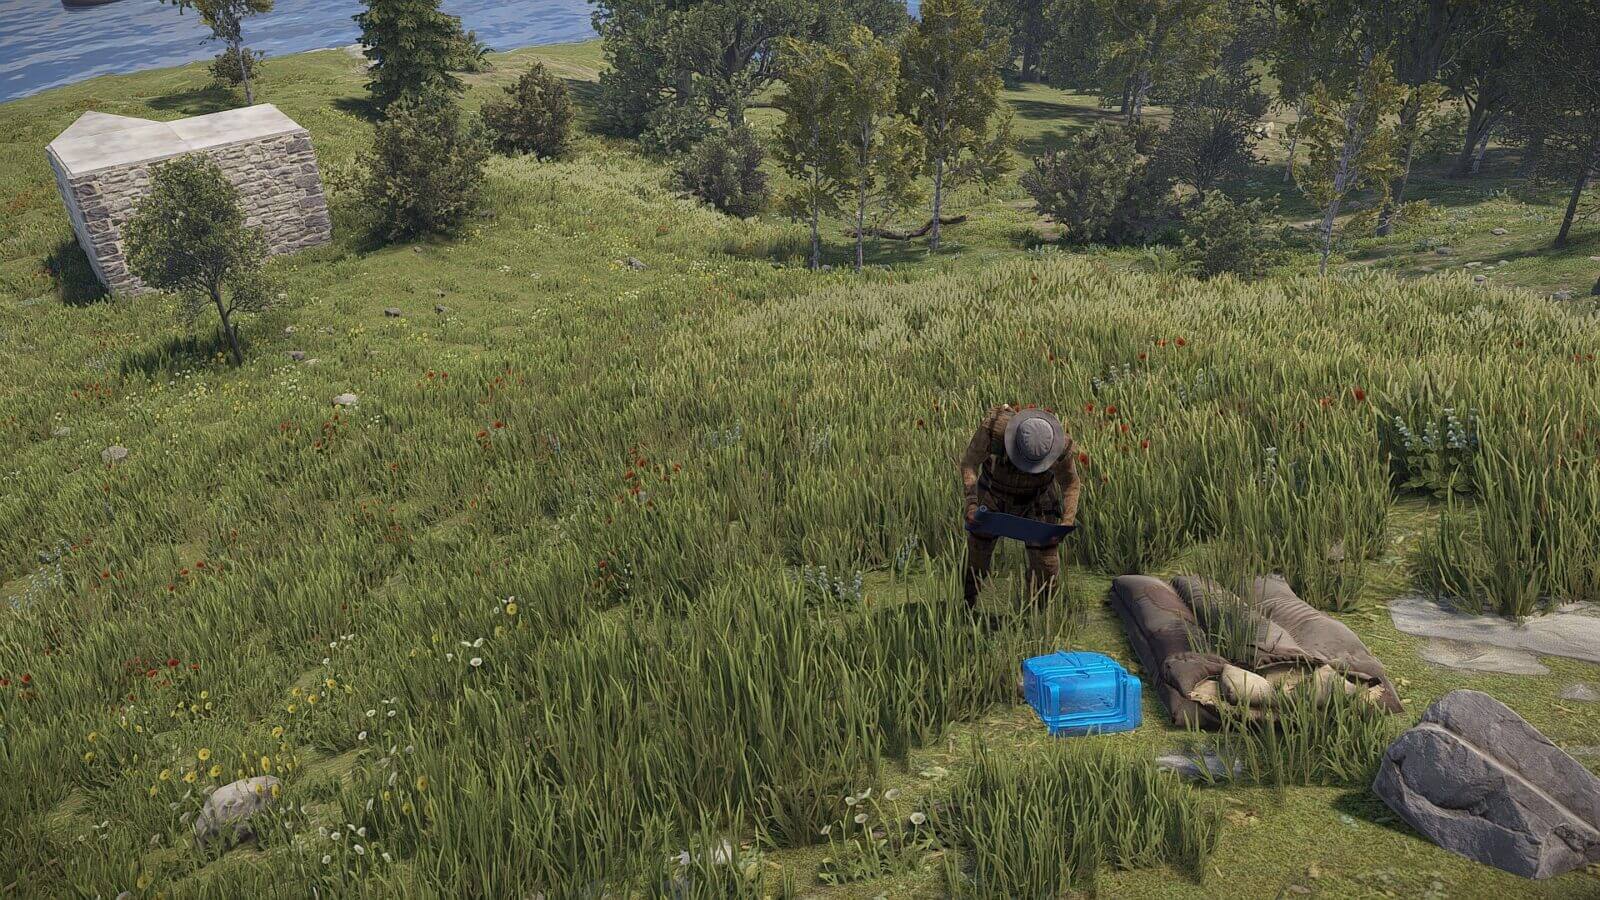 Placing a stash on the ground next to a sleeping bag for extra loot storage and distribution.